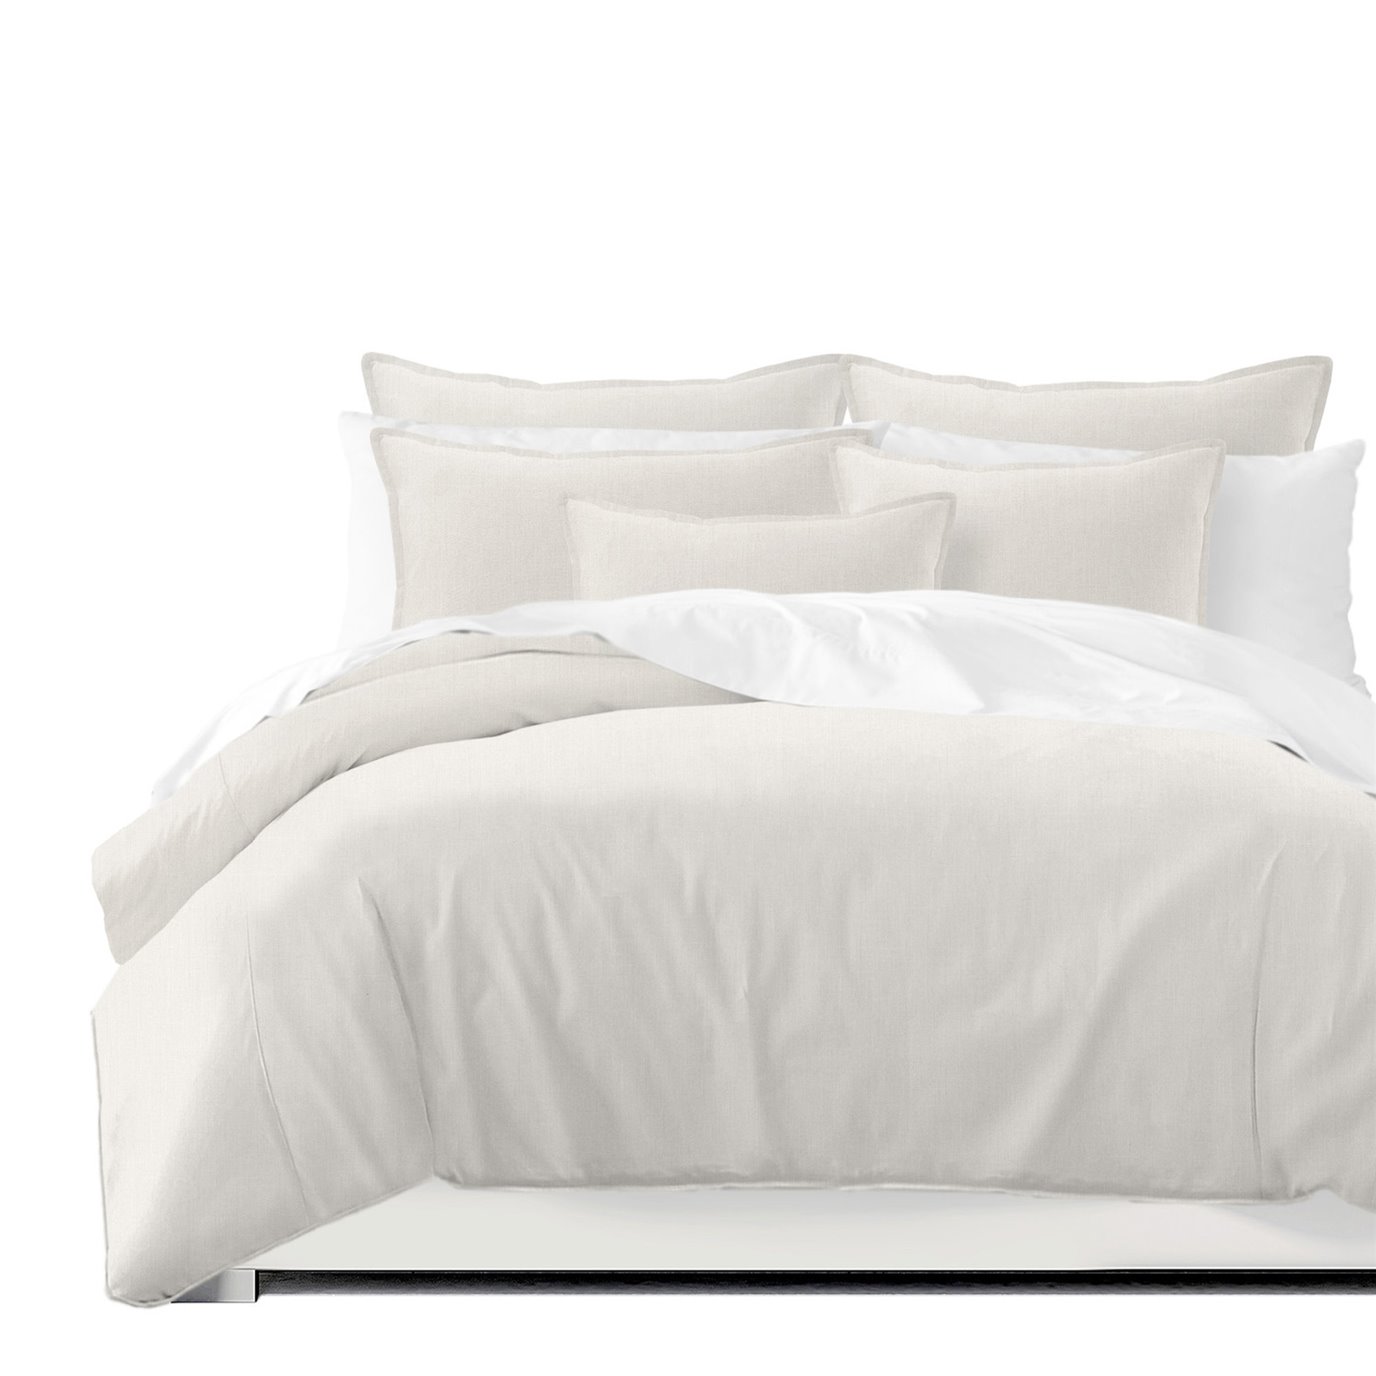 Sutton Pearl Comforter and Pillow Sham(s) Set - Size Queen